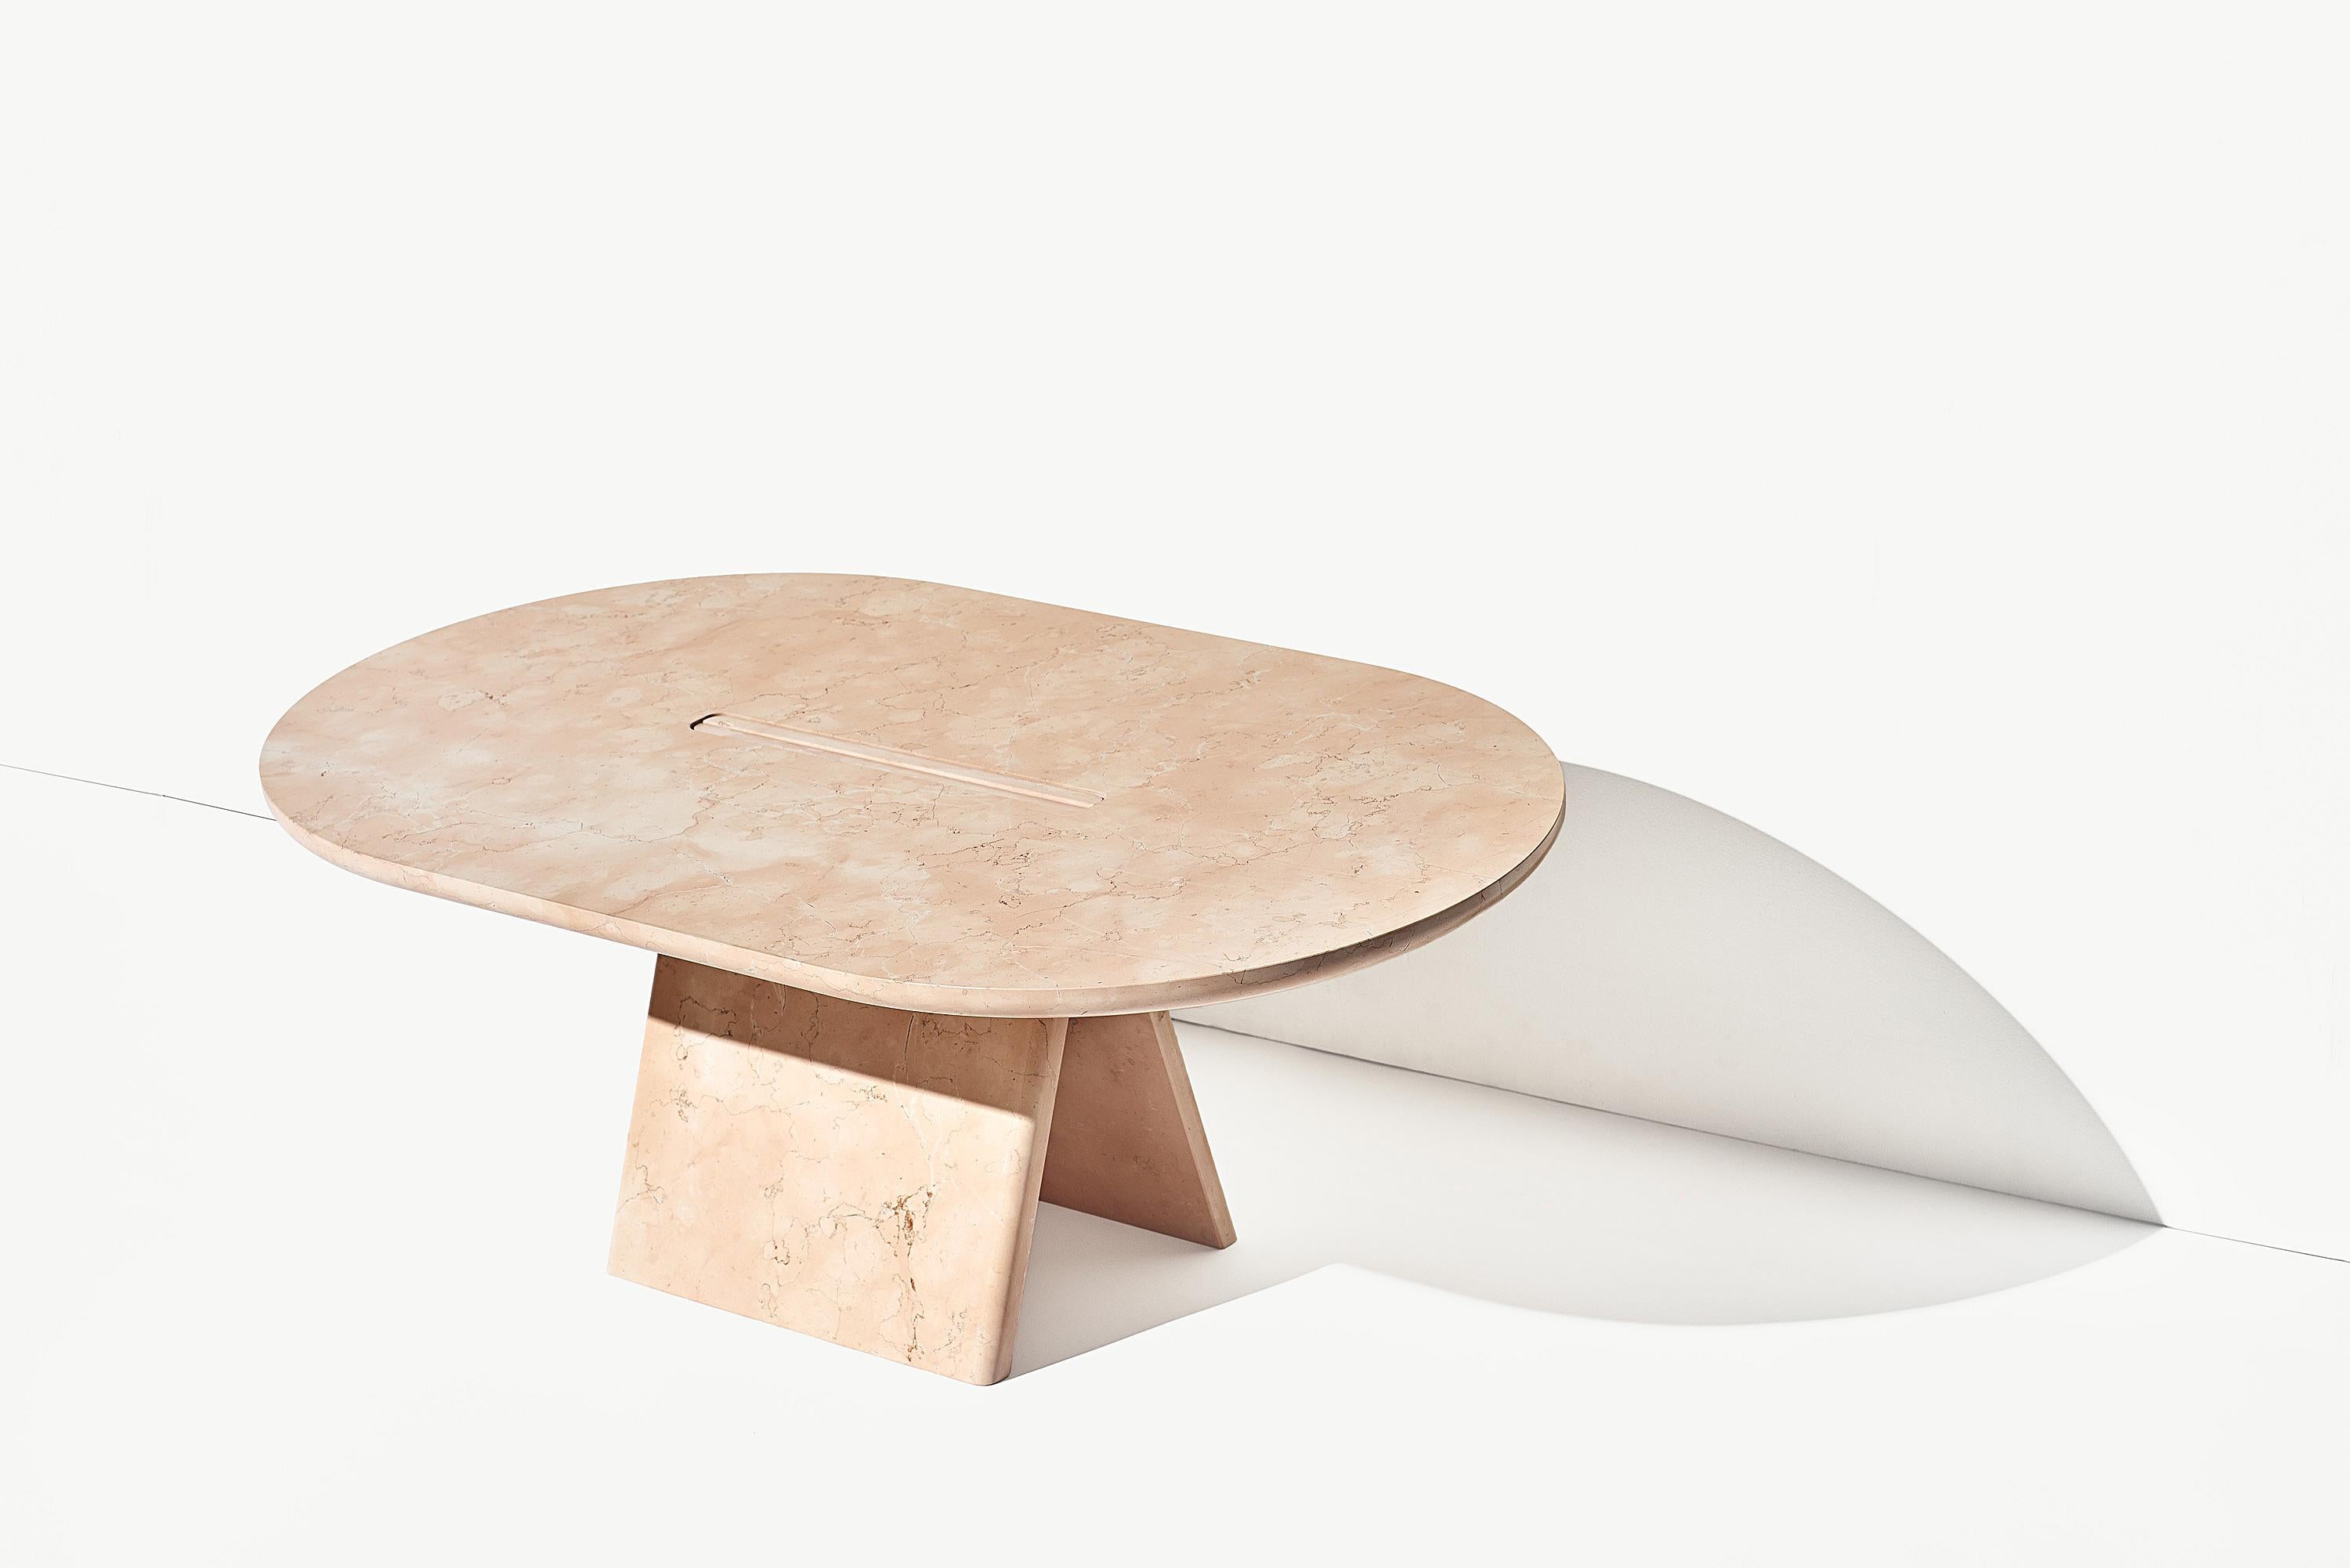 Lásta is a collection of coffee tables made of pink marble stone, typical from the area around Verona, in north of Italy. The pink stones had been used for centuries in the mountains north of Verona. The peculiarity of the material is that is